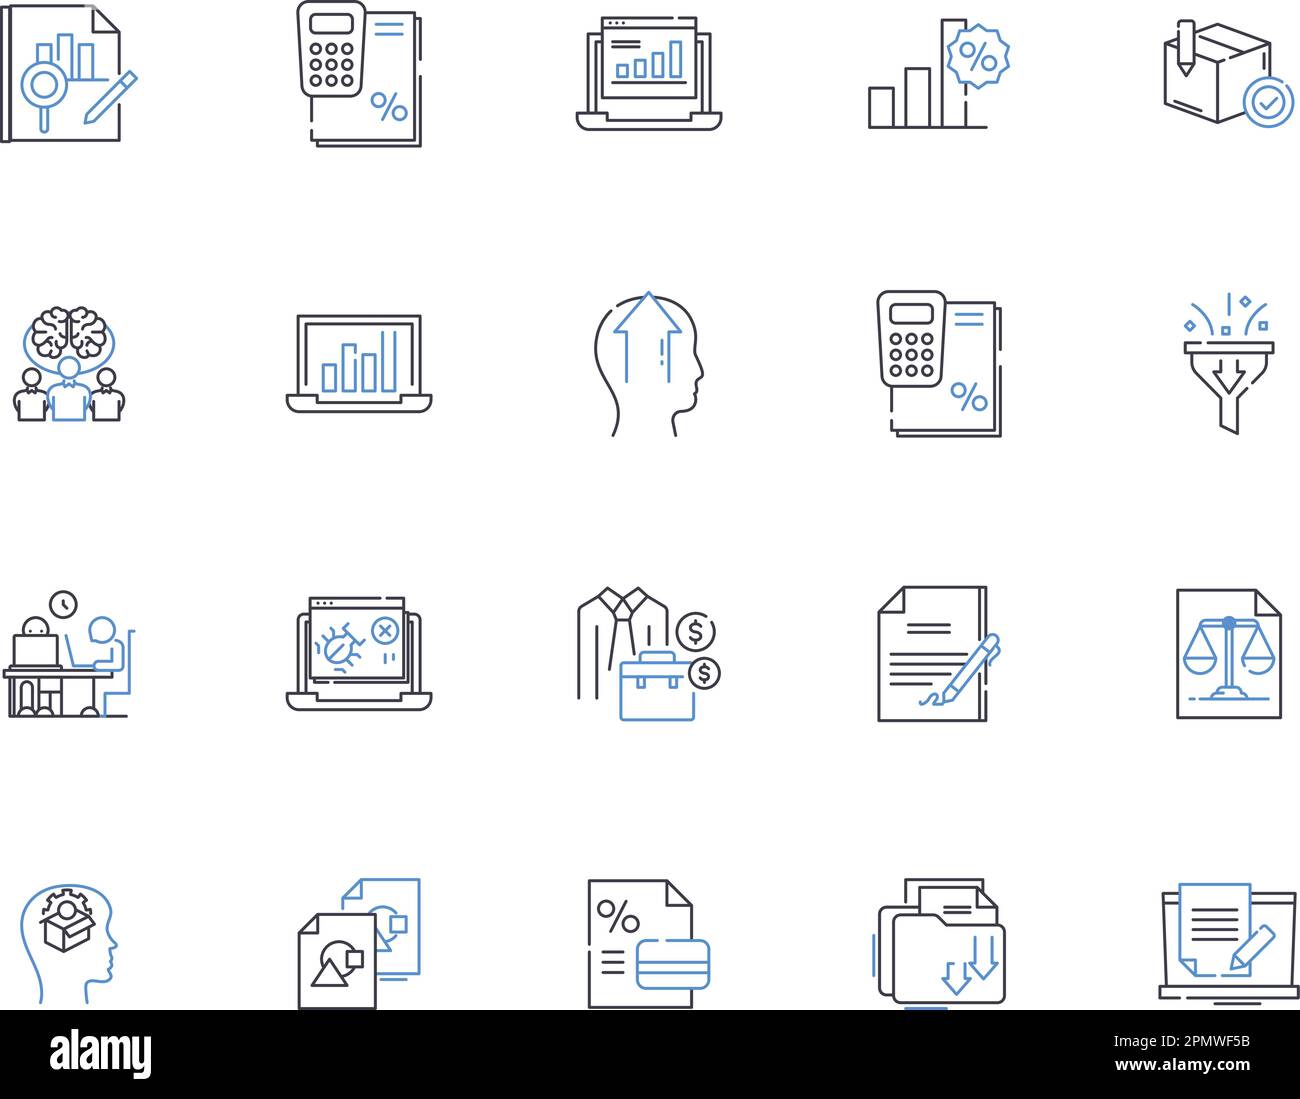 Analytics outline icons collection. Analysis, Trends, Data, Insights, Metrics, Surveys, KPIs vector and illustration concept set. Forecasts, Modeling Stock Vector